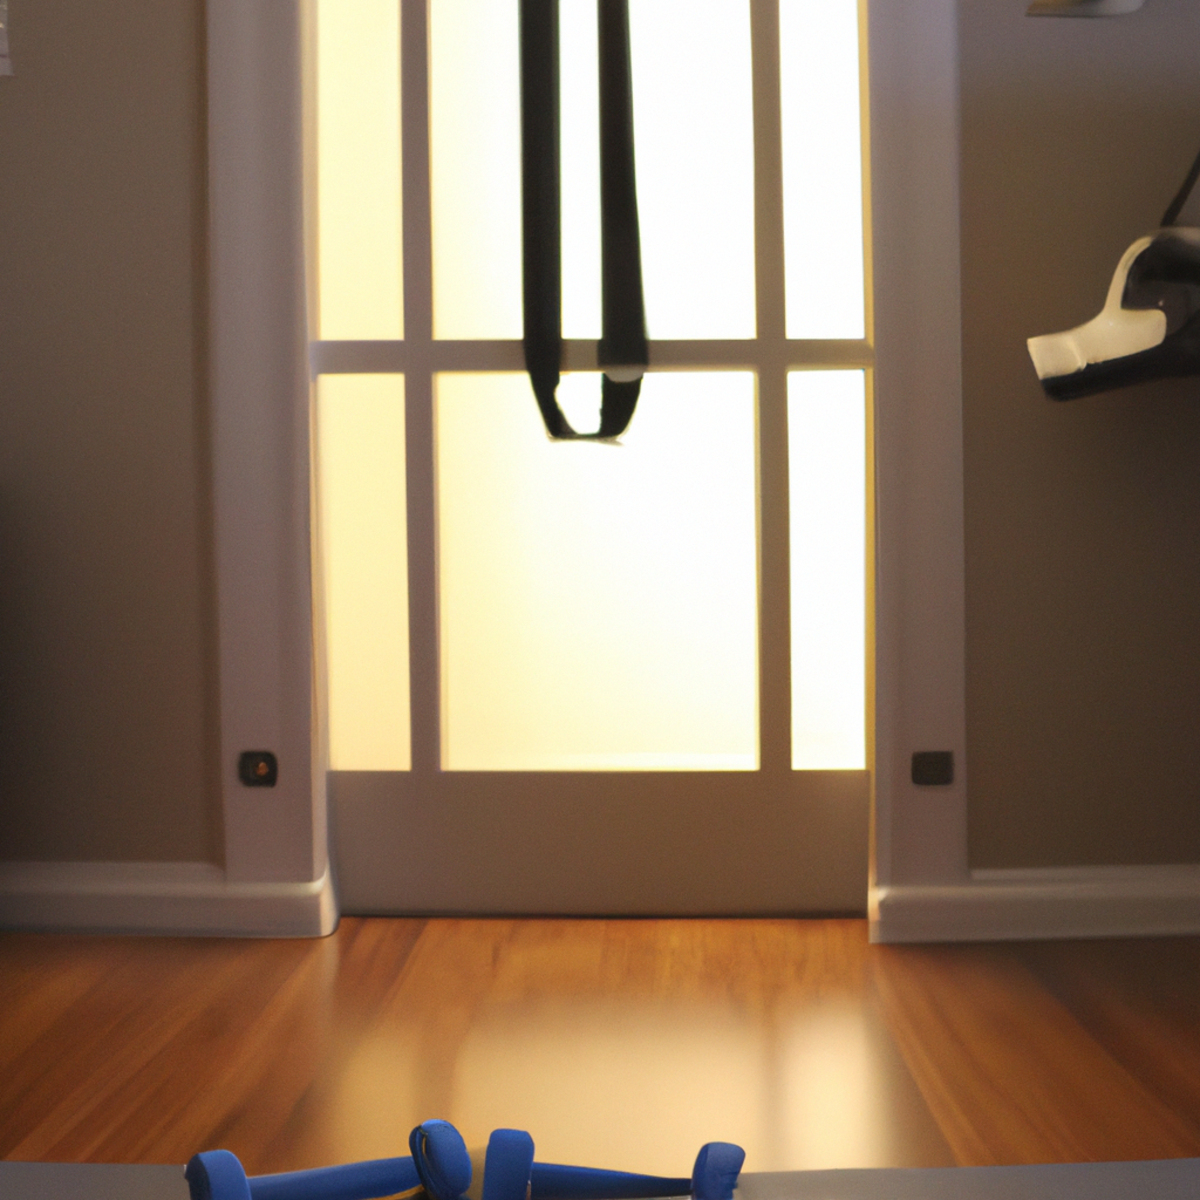 The photo depicts a simple yet effective setup for bodyweight exercises at home. In the foreground, there is a yoga mat laid out on the floor, with a pair of dumbbells resting on it. In the background, there is a pull-up bar mounted on the wall, with a resistance band looped around it. The scene is well-lit, with natural light streaming in from a nearby window, and the objects are arranged neatly and strategically for maximum workout potential. The photo captures the essence of the article's message - that with just a few basic tools and some dedication, anyone can build strength and muscle at home using bodyweight exercises.